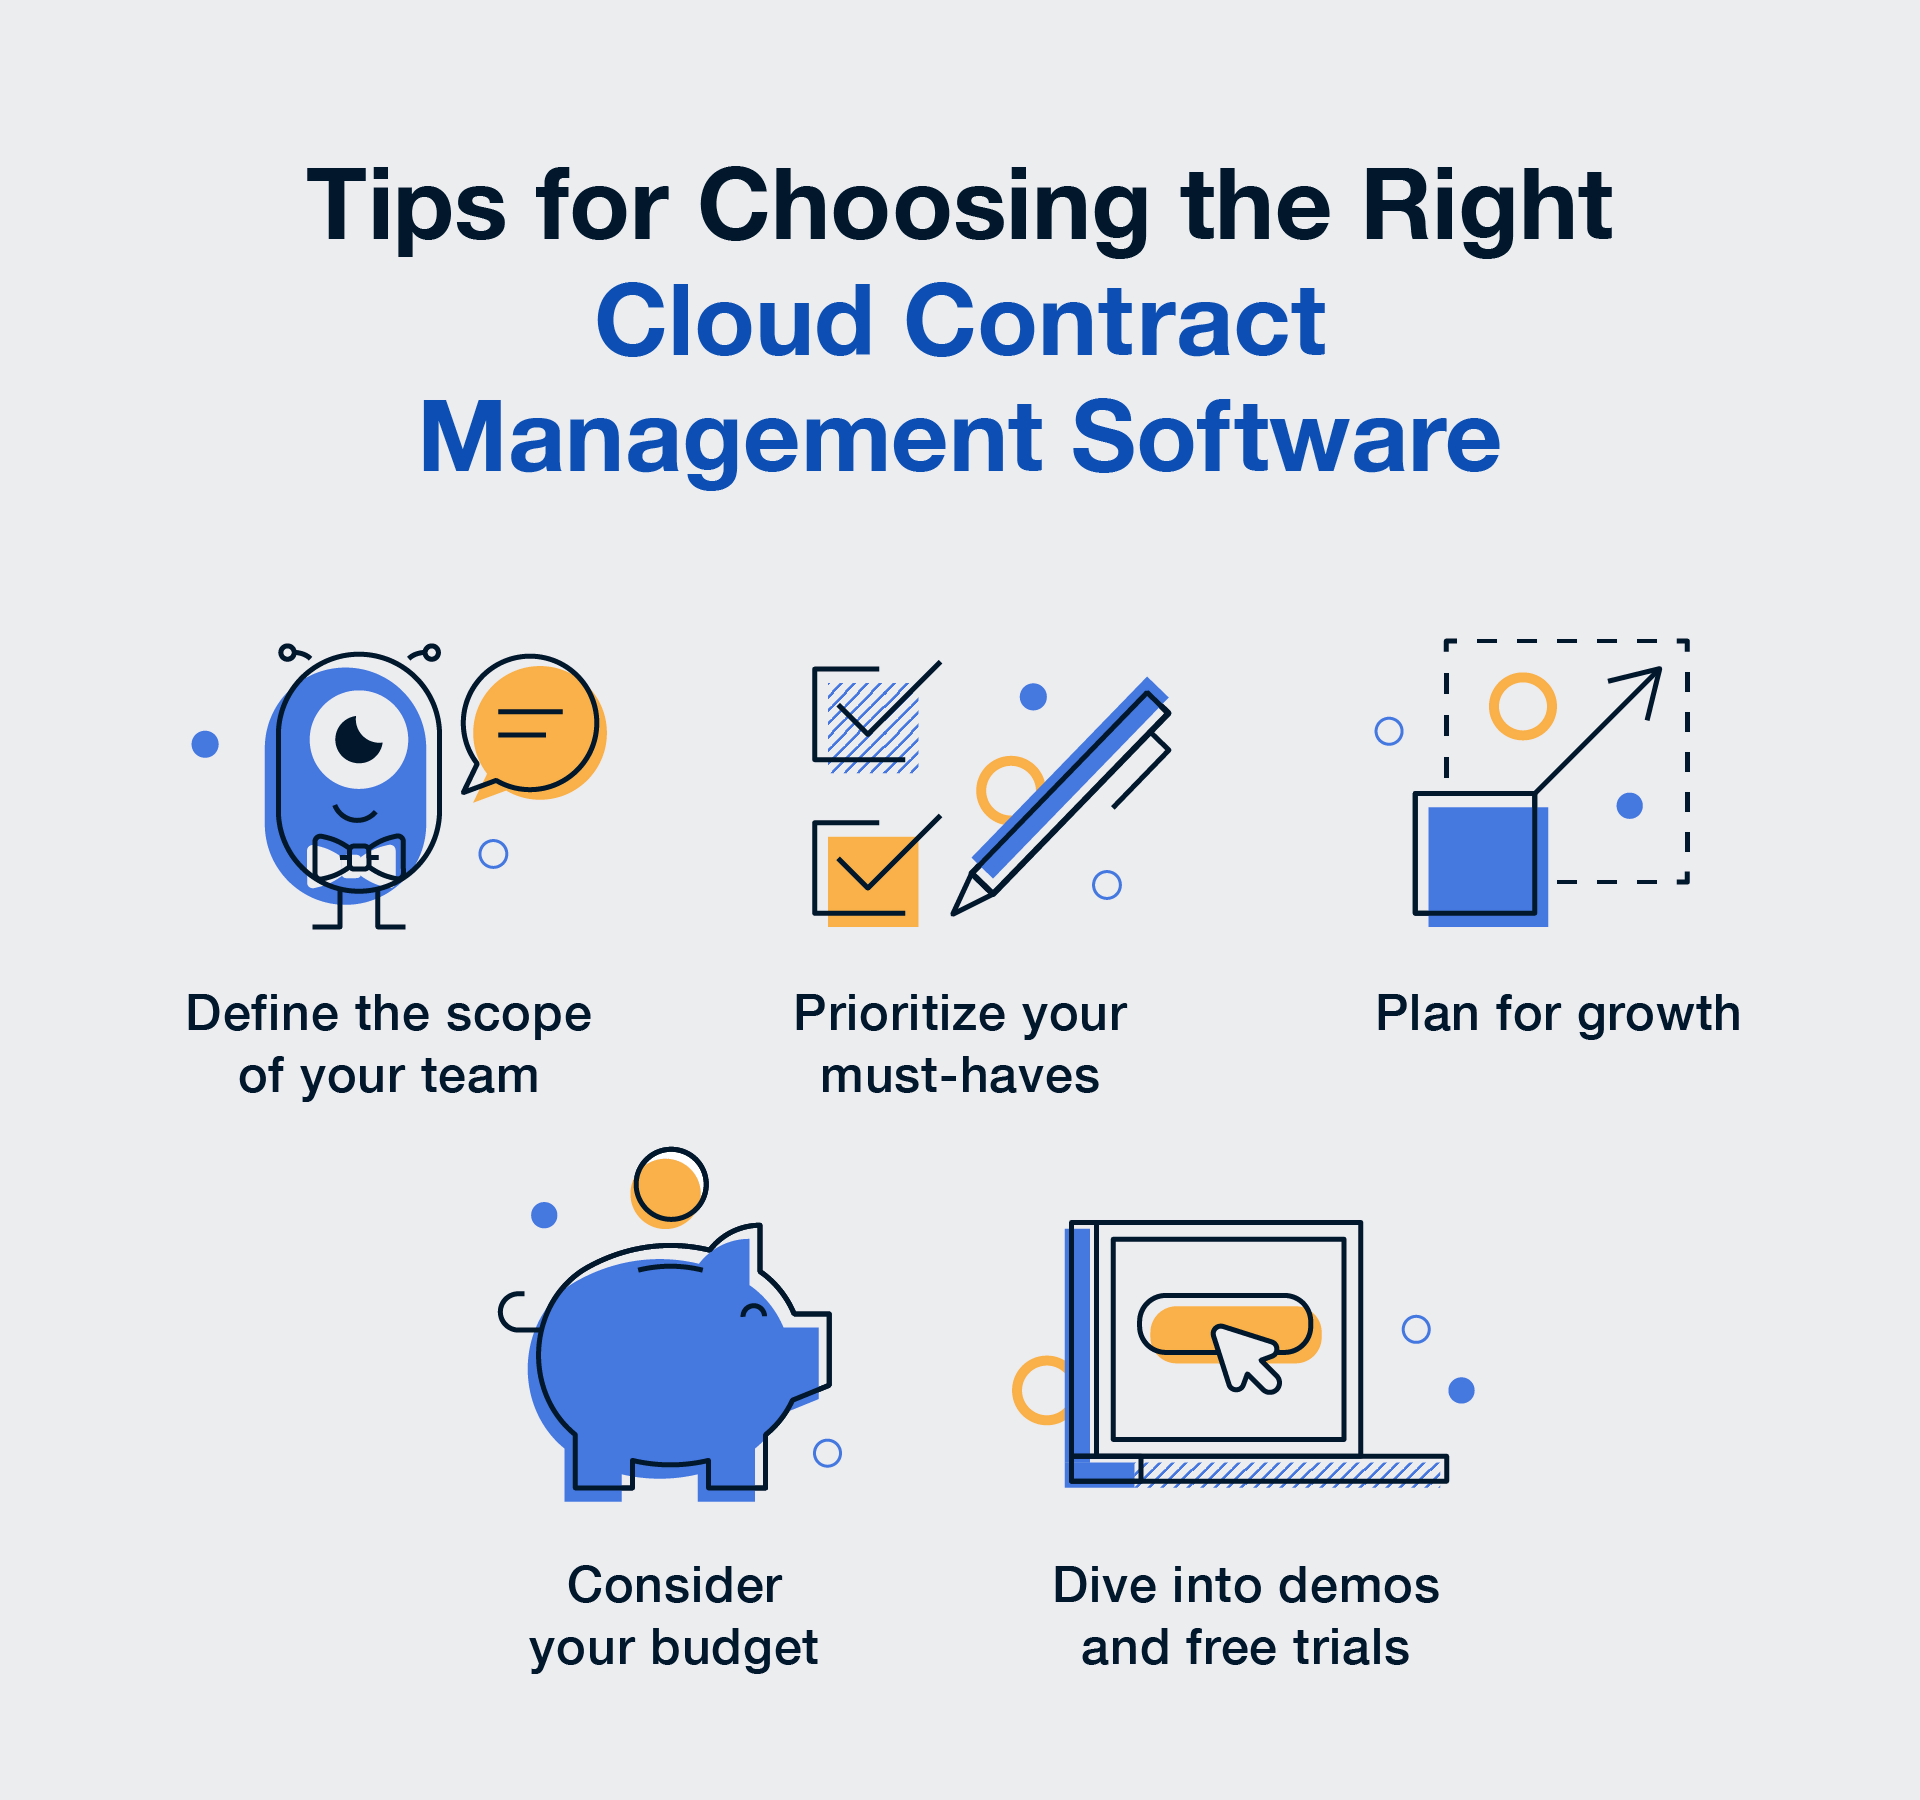 tips-for-choosing-the-right-cloud-contract-management-software